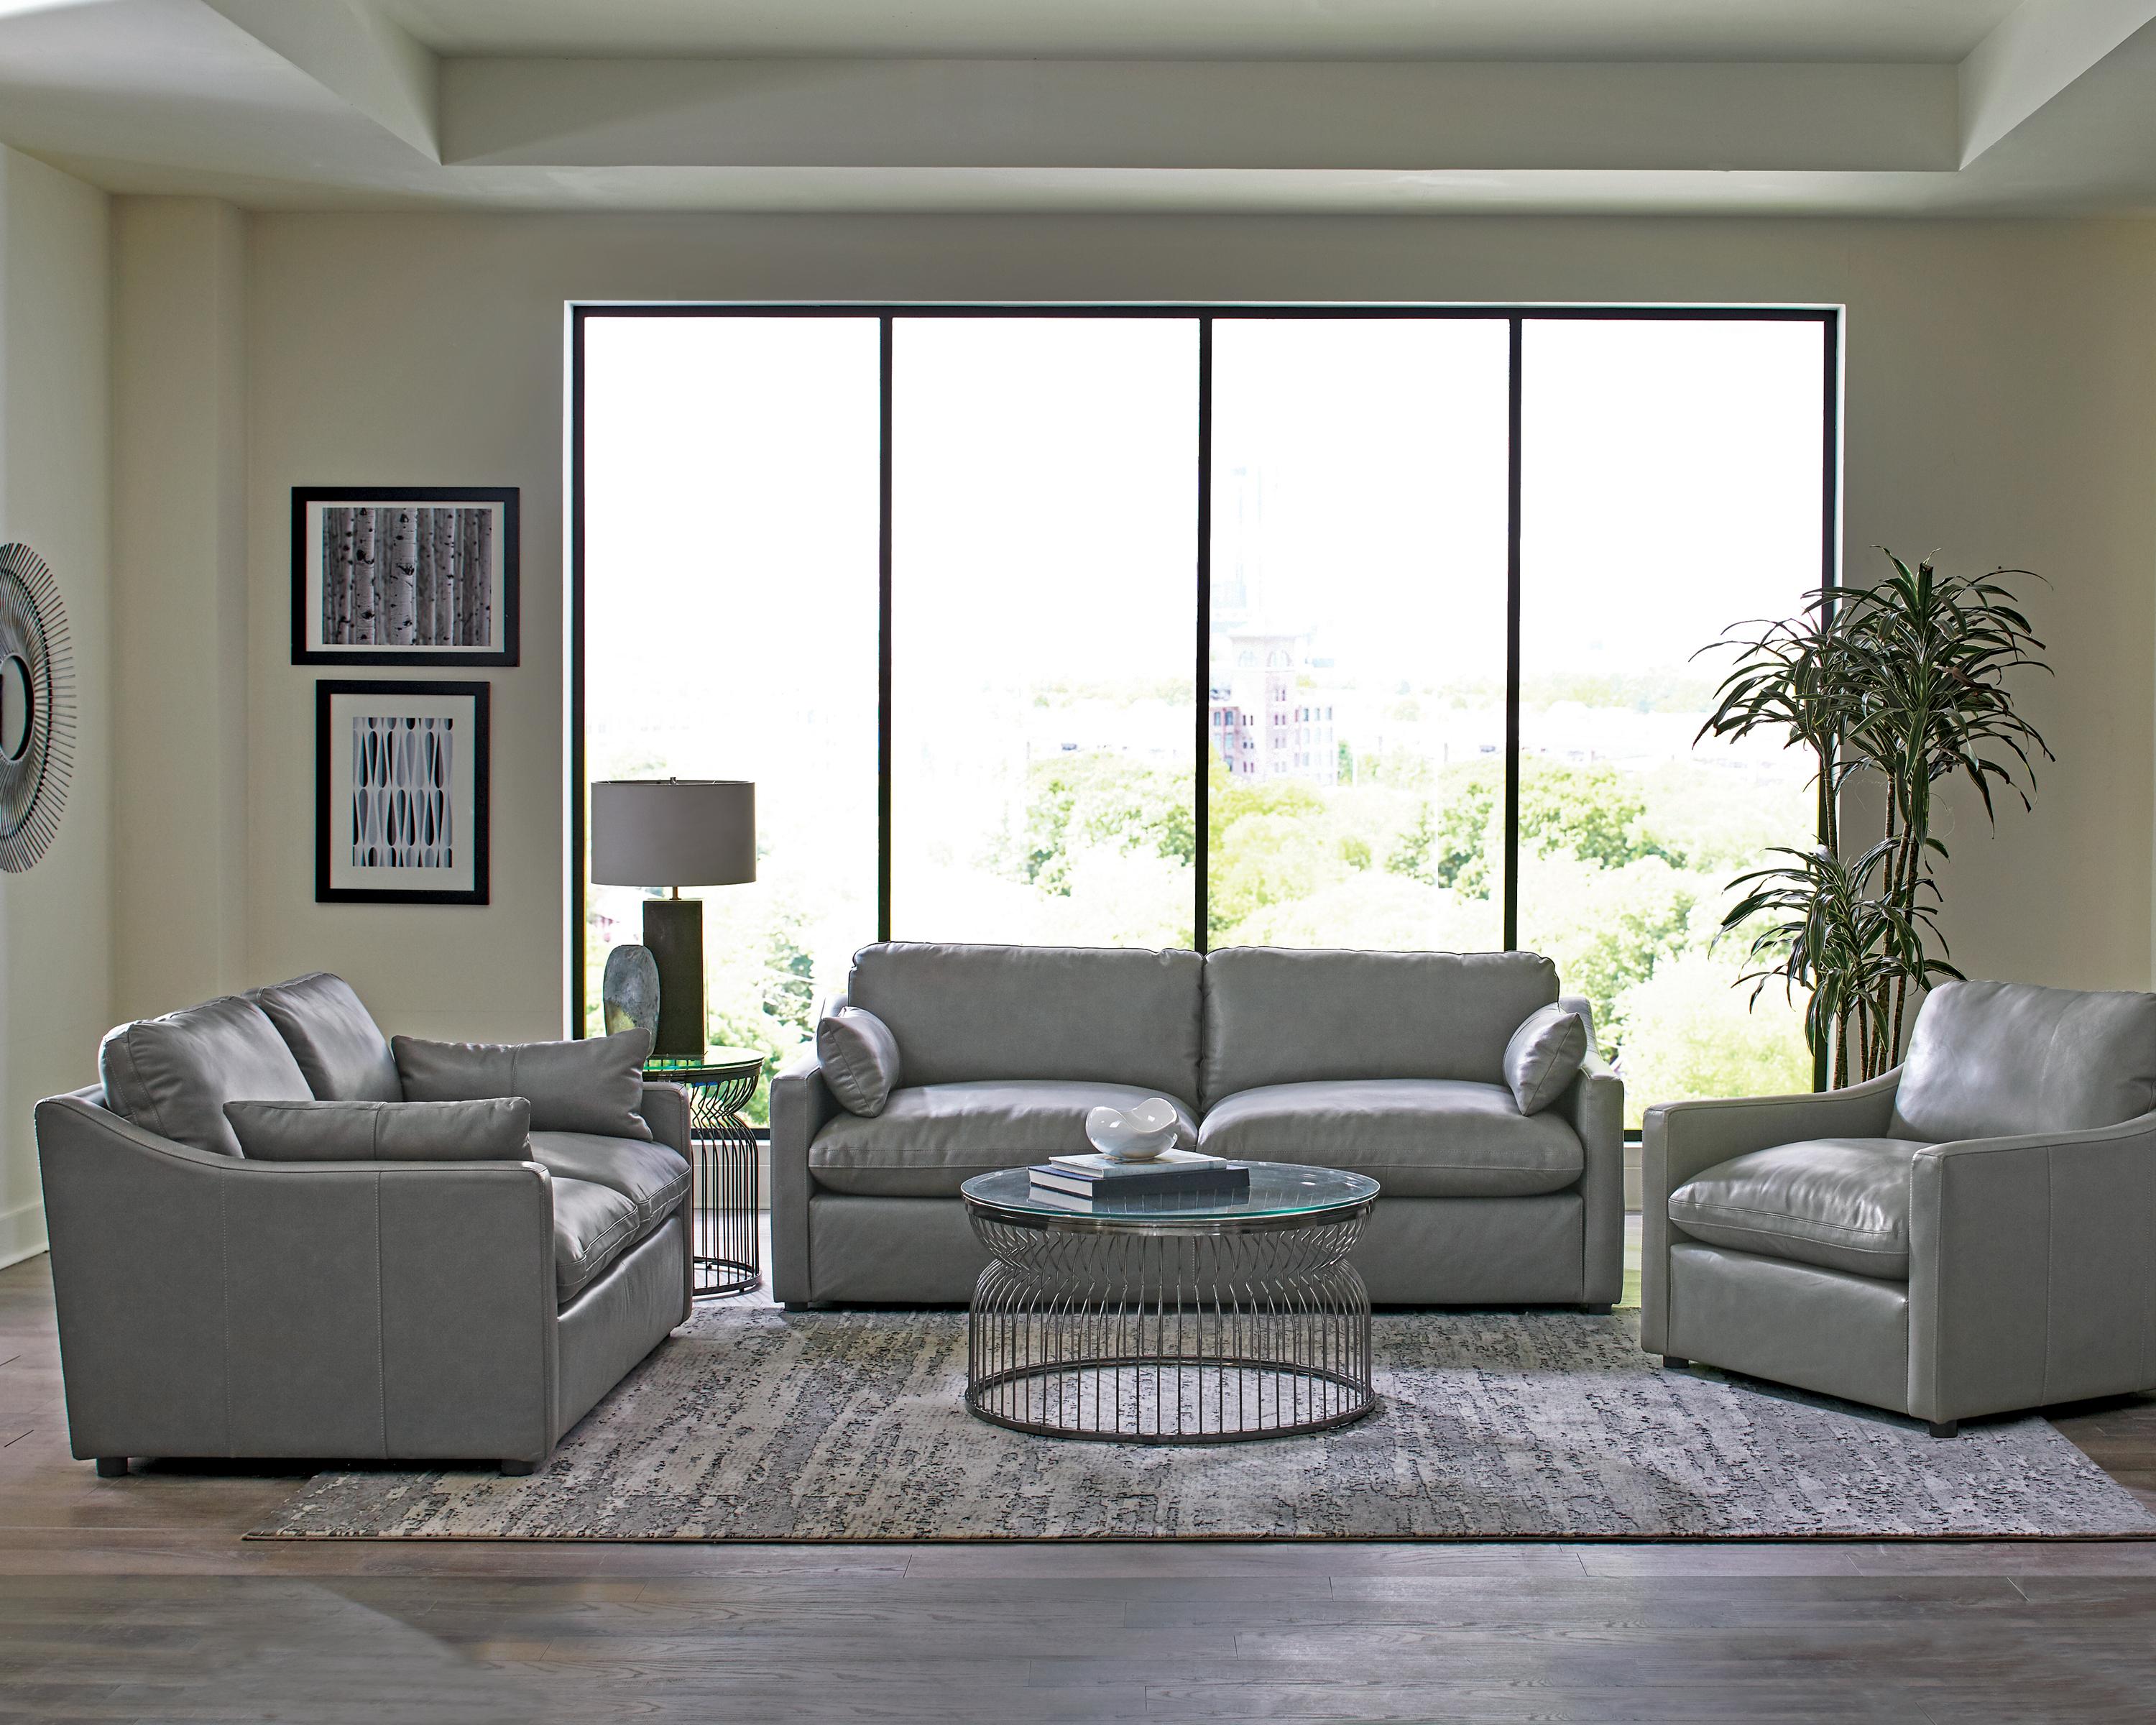 Modern Living Room Set 506771-S3 Grayson 506771-S3 in Gray Leather